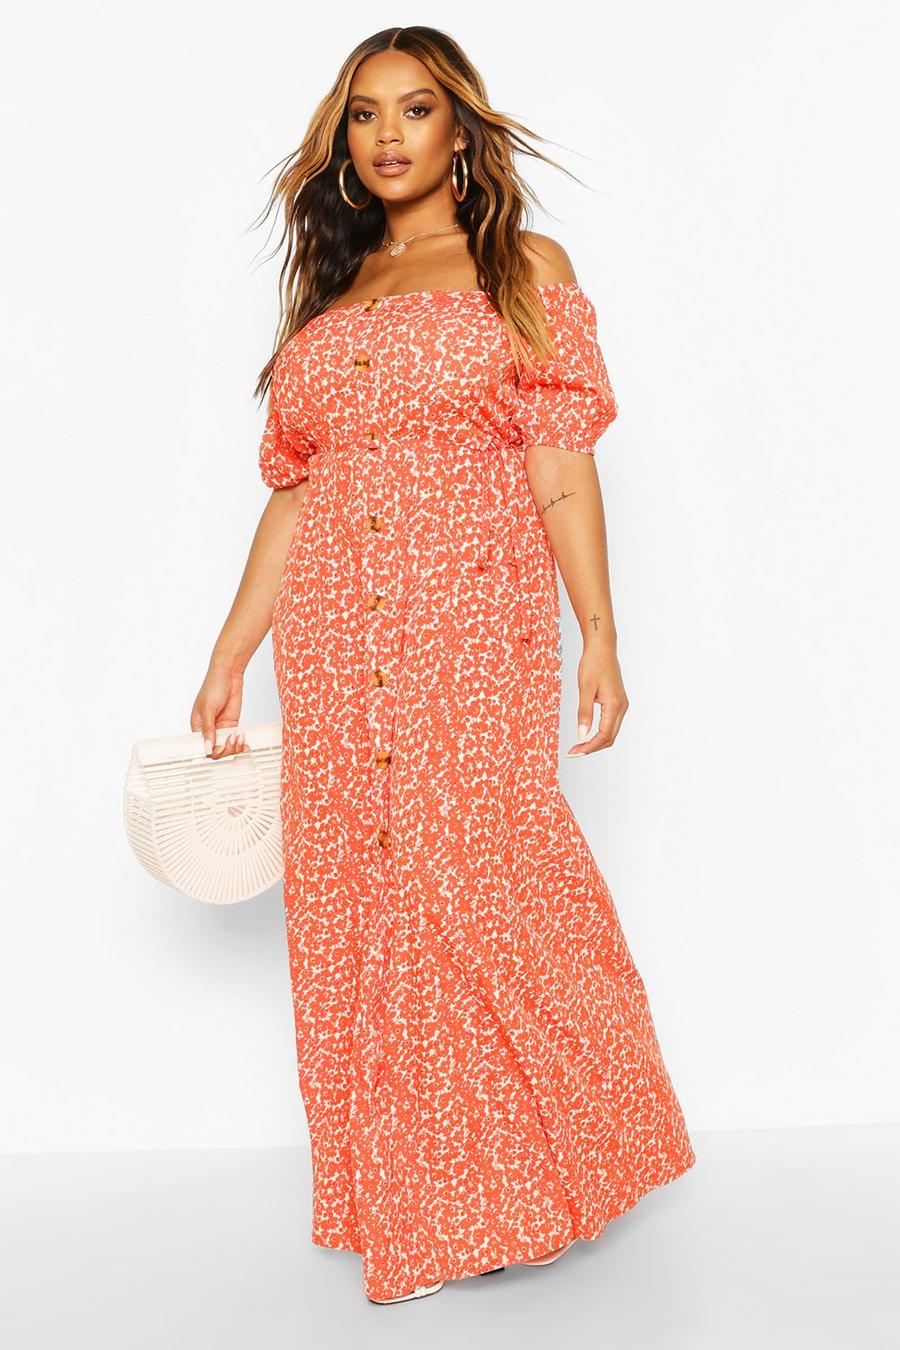  Leadingstar Maxi Dress for Women Plus Size Summer Dresses Boho  Floral Spaghetti Strap Sexy Party Beach Vacation Sundresses Blue Orange XL  : Clothing, Shoes & Jewelry